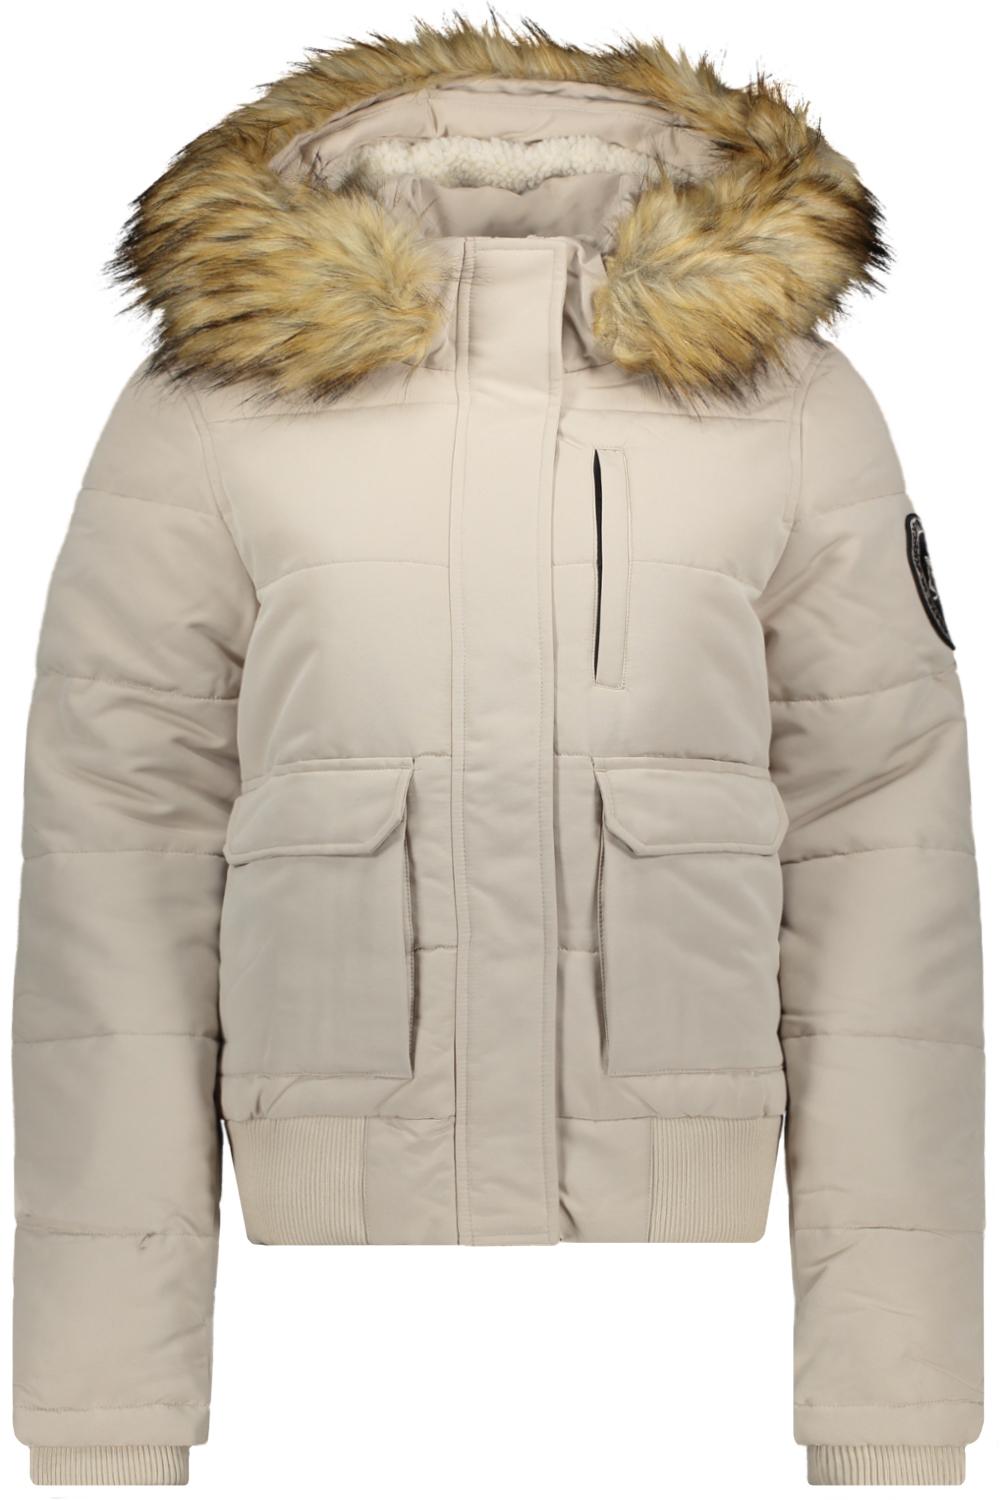 everest hooded puffer bomber w5011576a superdry jas 7mo chateau grey